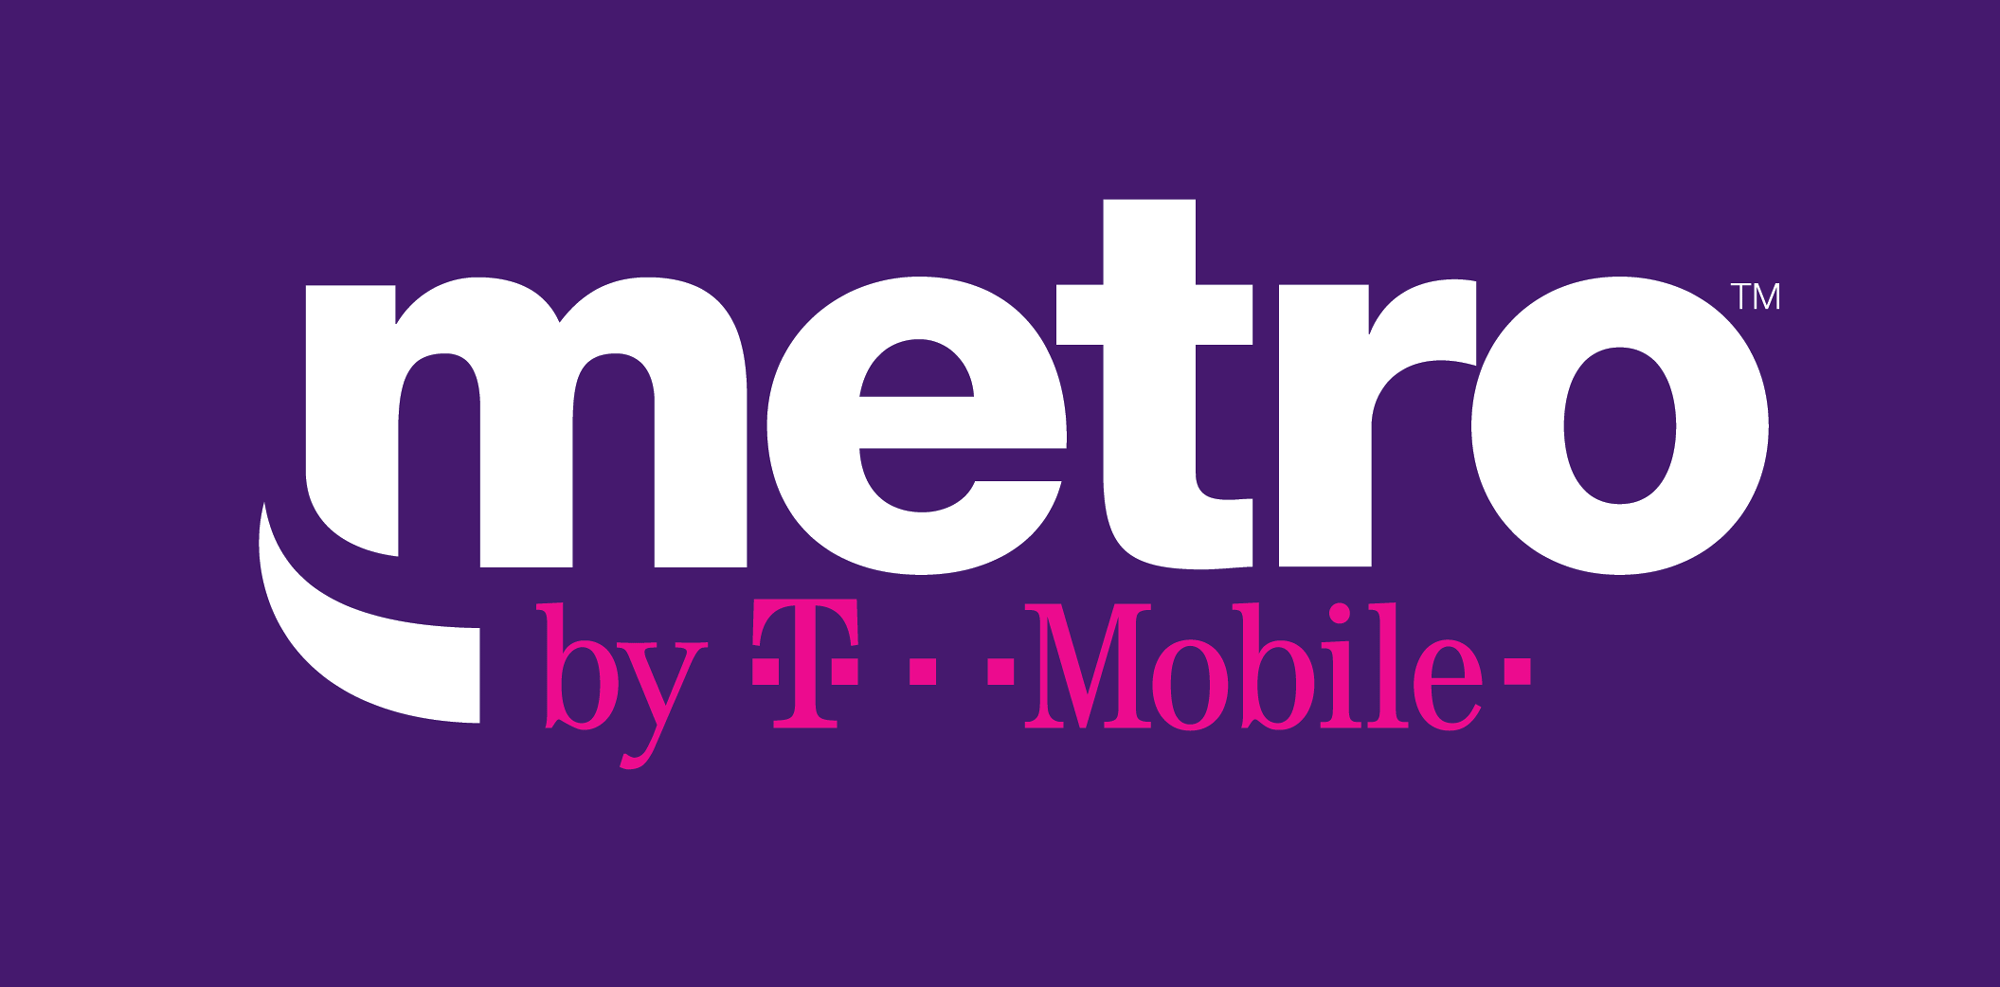 T- Mobile Logo - Brand New: New Name and Logo for Metro by T-Mobile